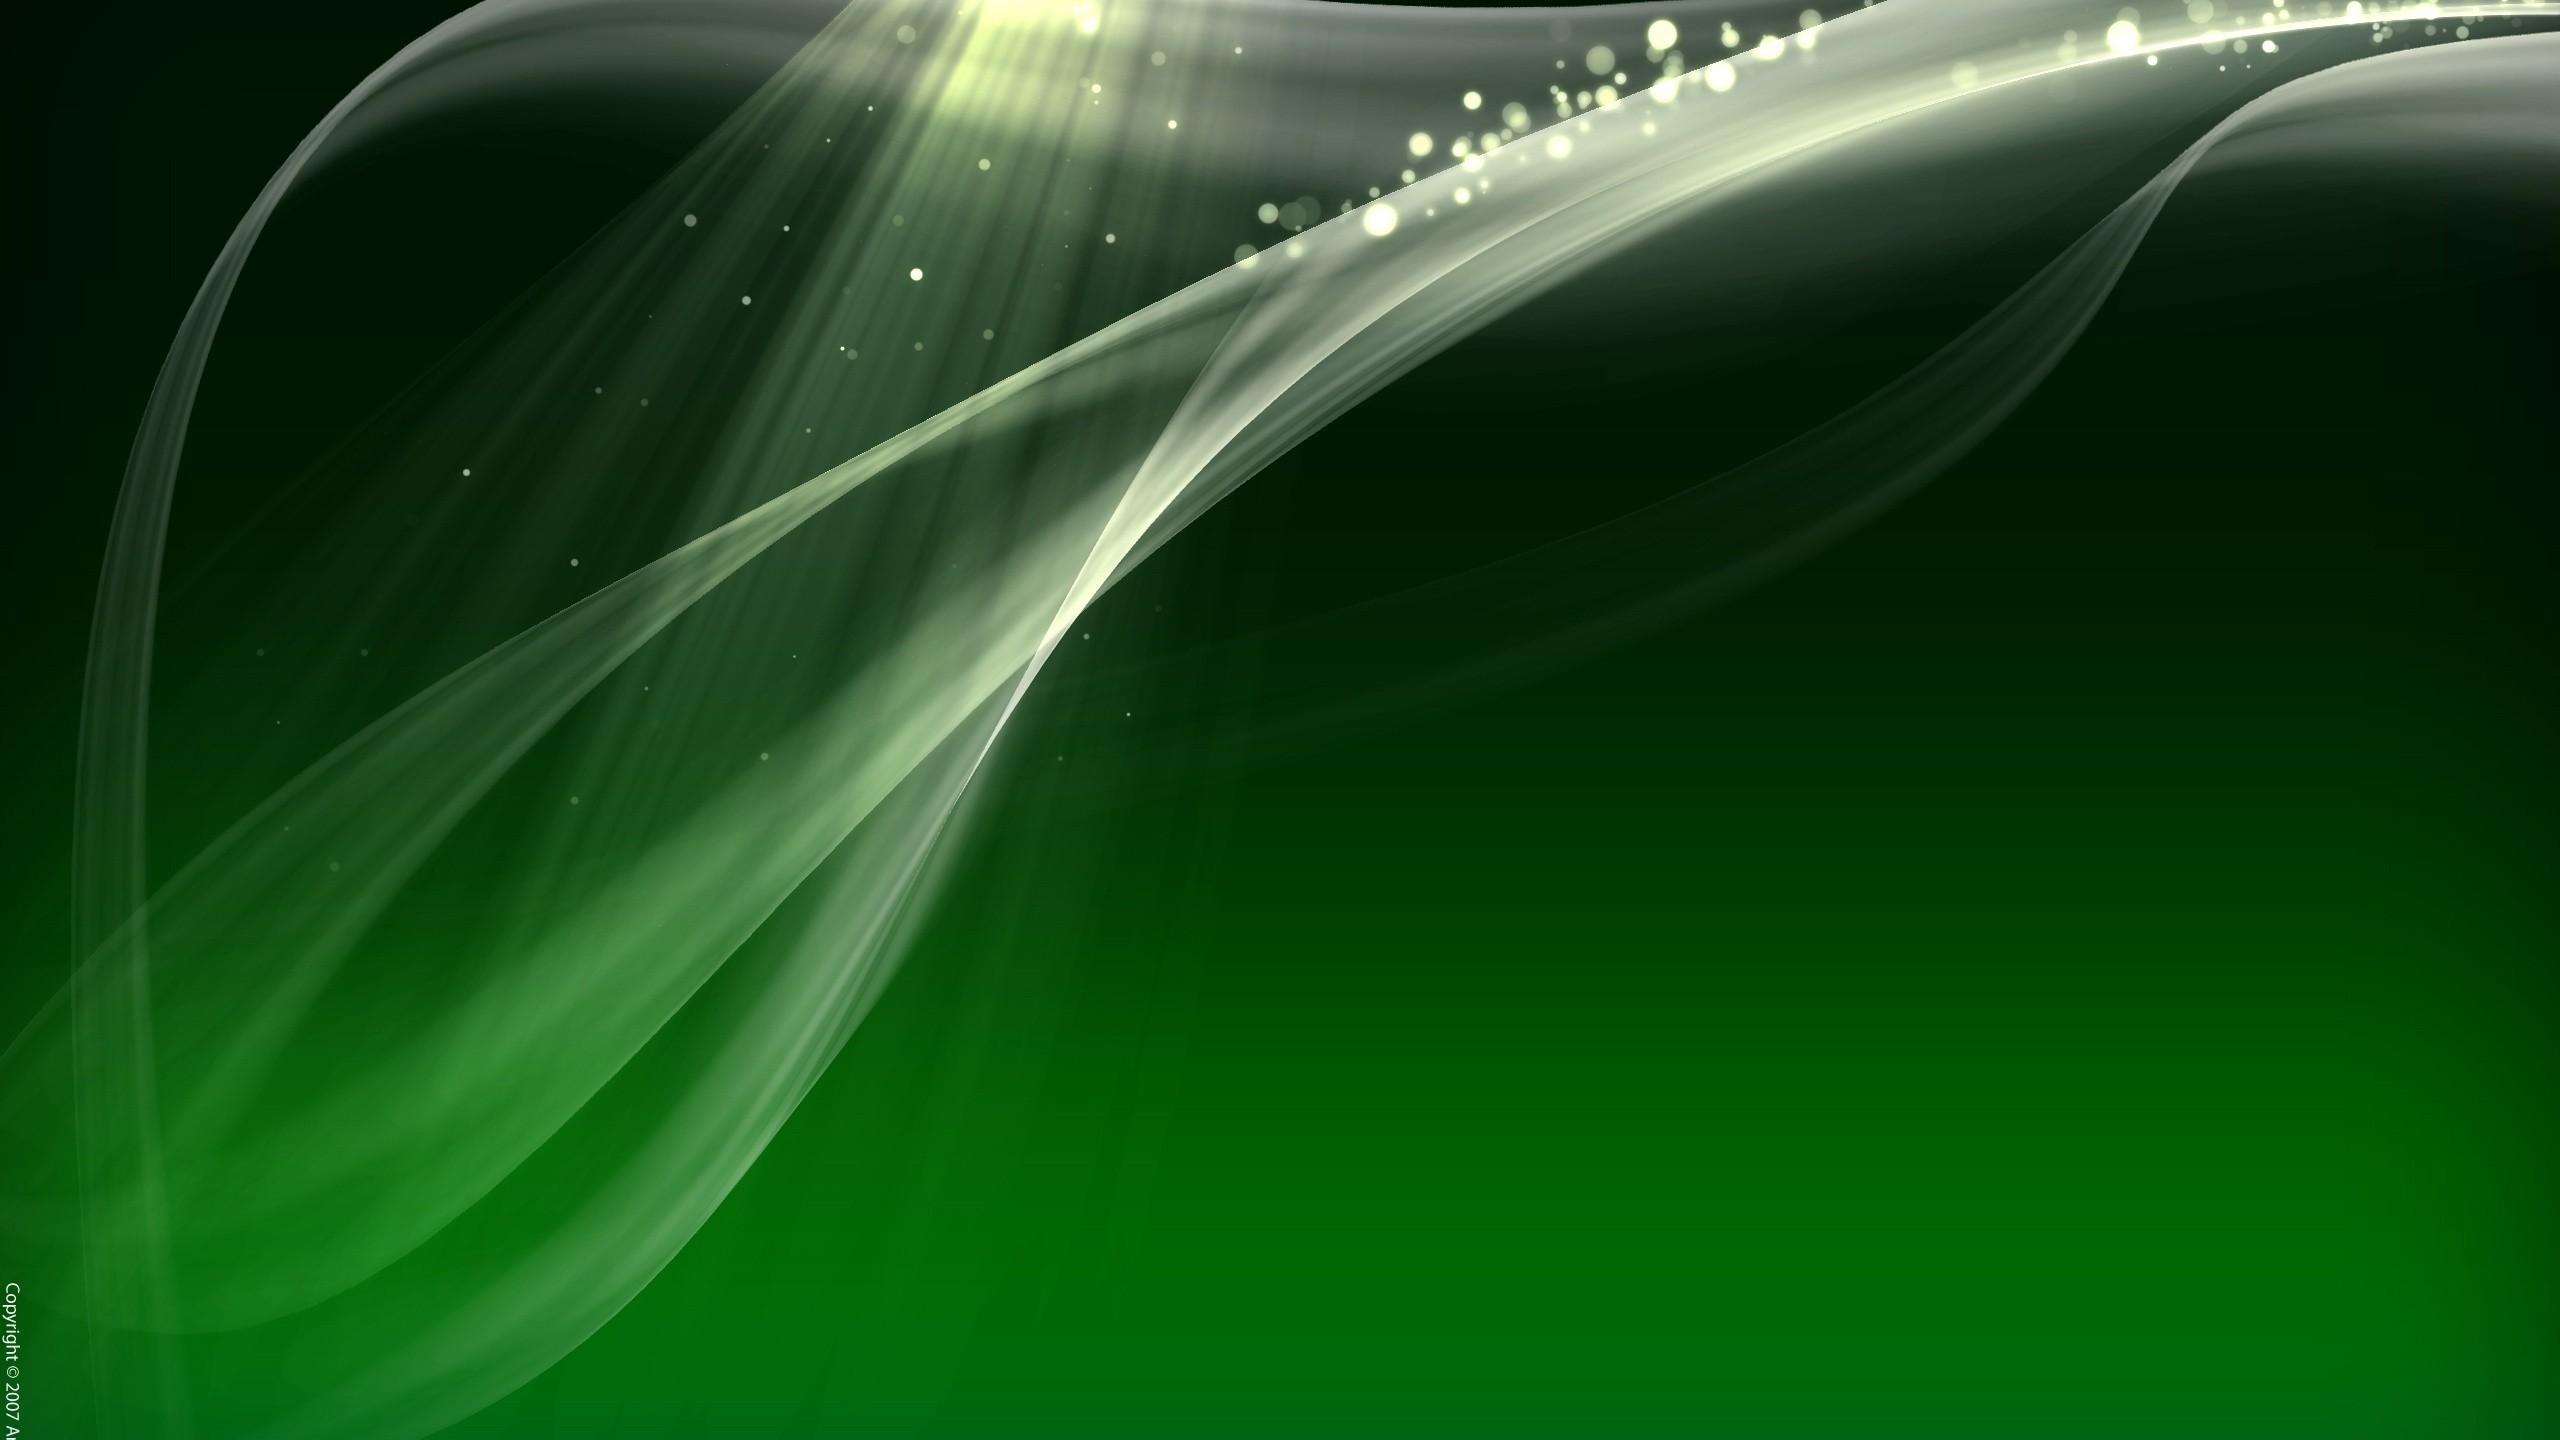 Free Download Green Abstract Windows 81 Wallpapers All For Windows 10